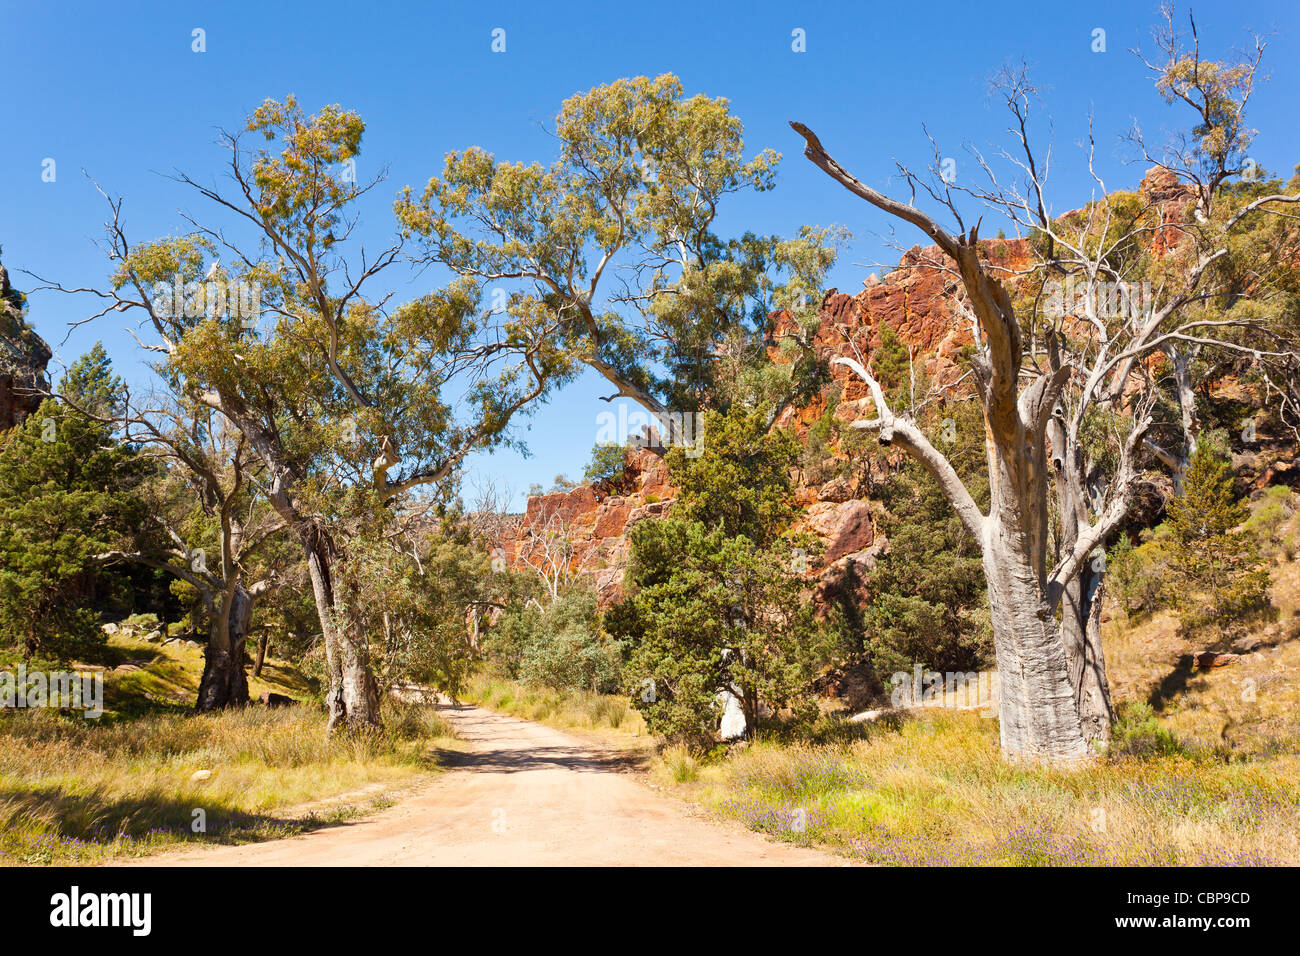 Old River Red Gum Trees (Eucalyptus camaldulensis) at Warren Gorge near Quorn in the Flinders Ranges in outback South Australia, Australia Stock Photo